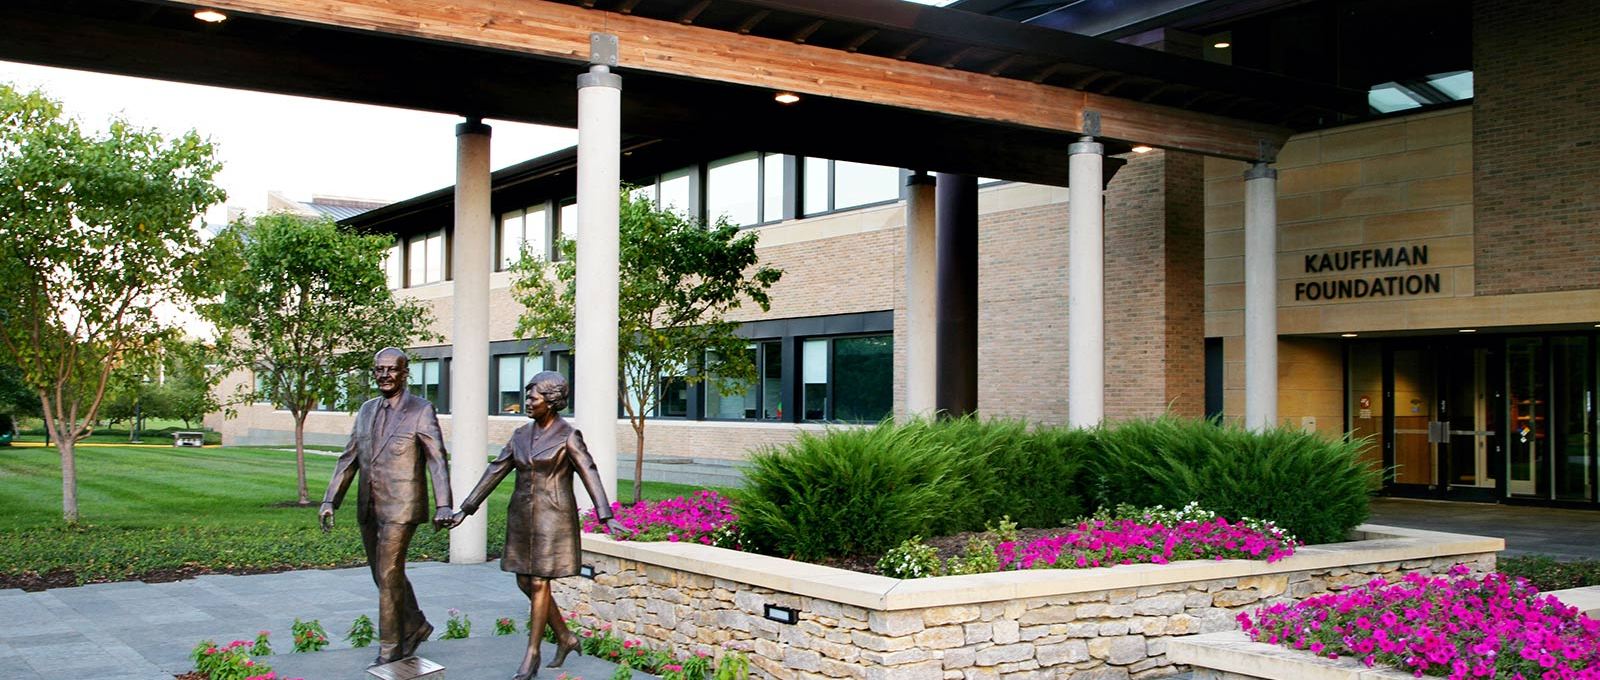 The front entrance of the Ewing Marion Kauffman Foundation features two bronze statues of Mr. and Mrs. Kauffman.